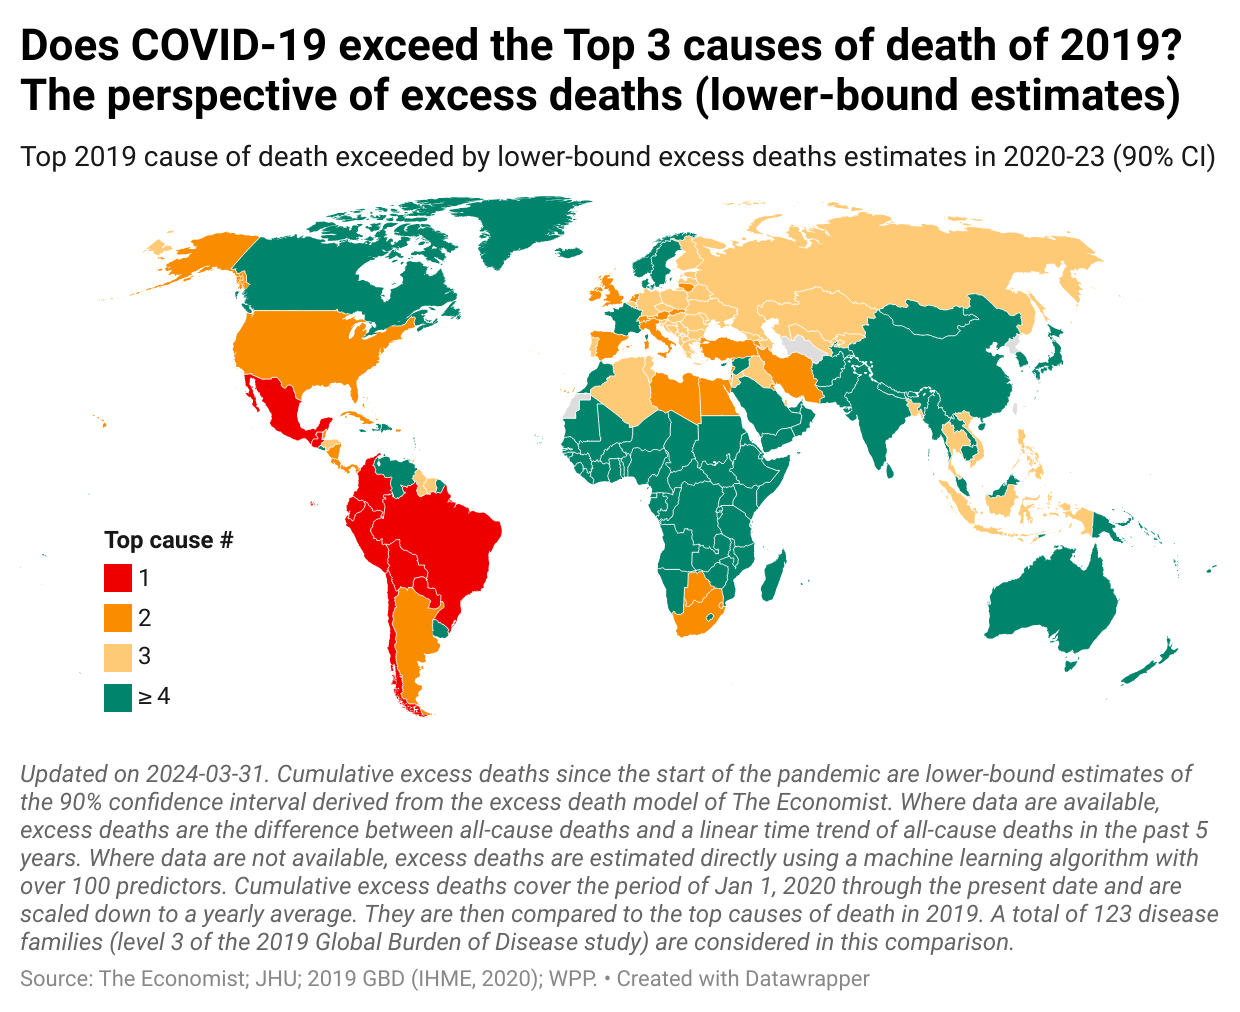 Pandemic severity based on lower bound estimates of excess mortality